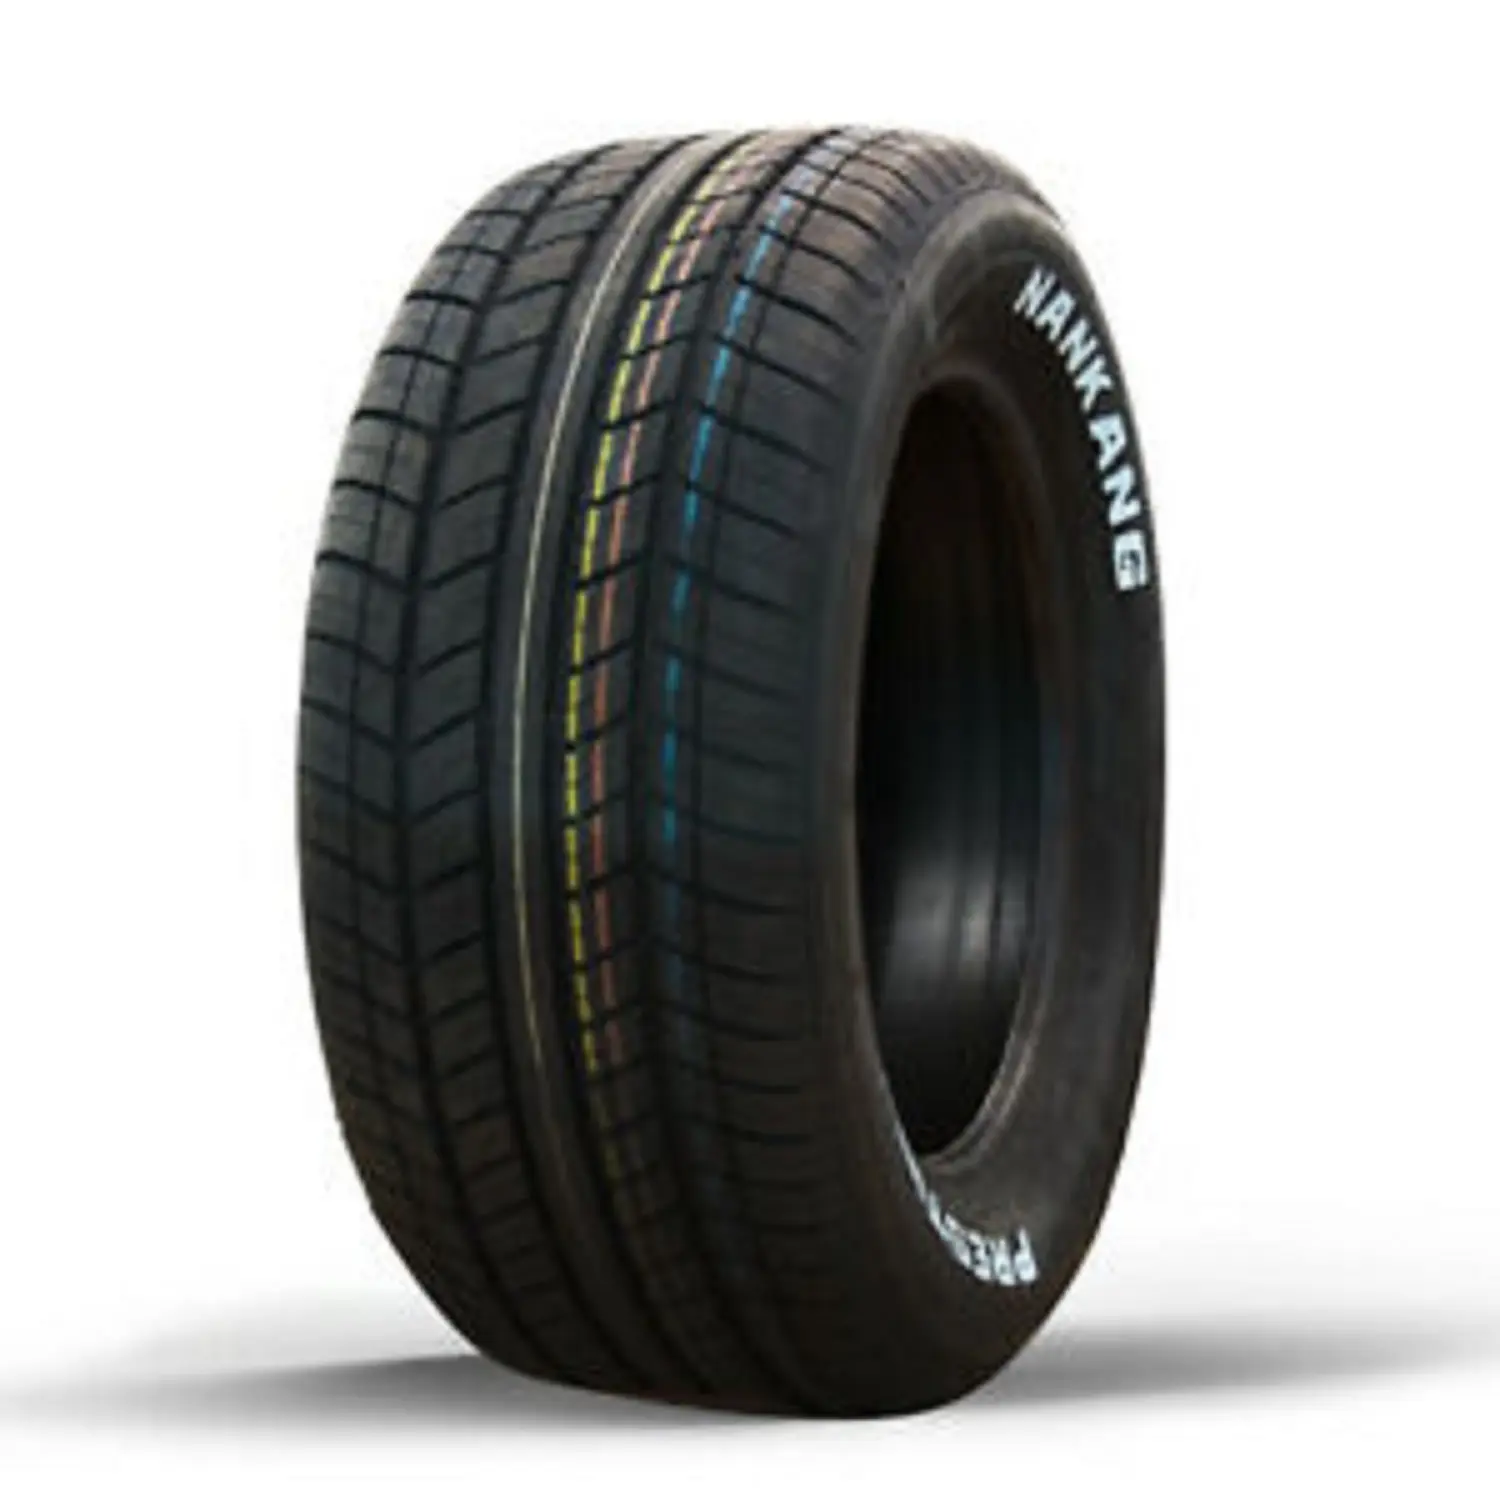 Tire Manufacture R15/R16 Black Rubber Used Car Tyres